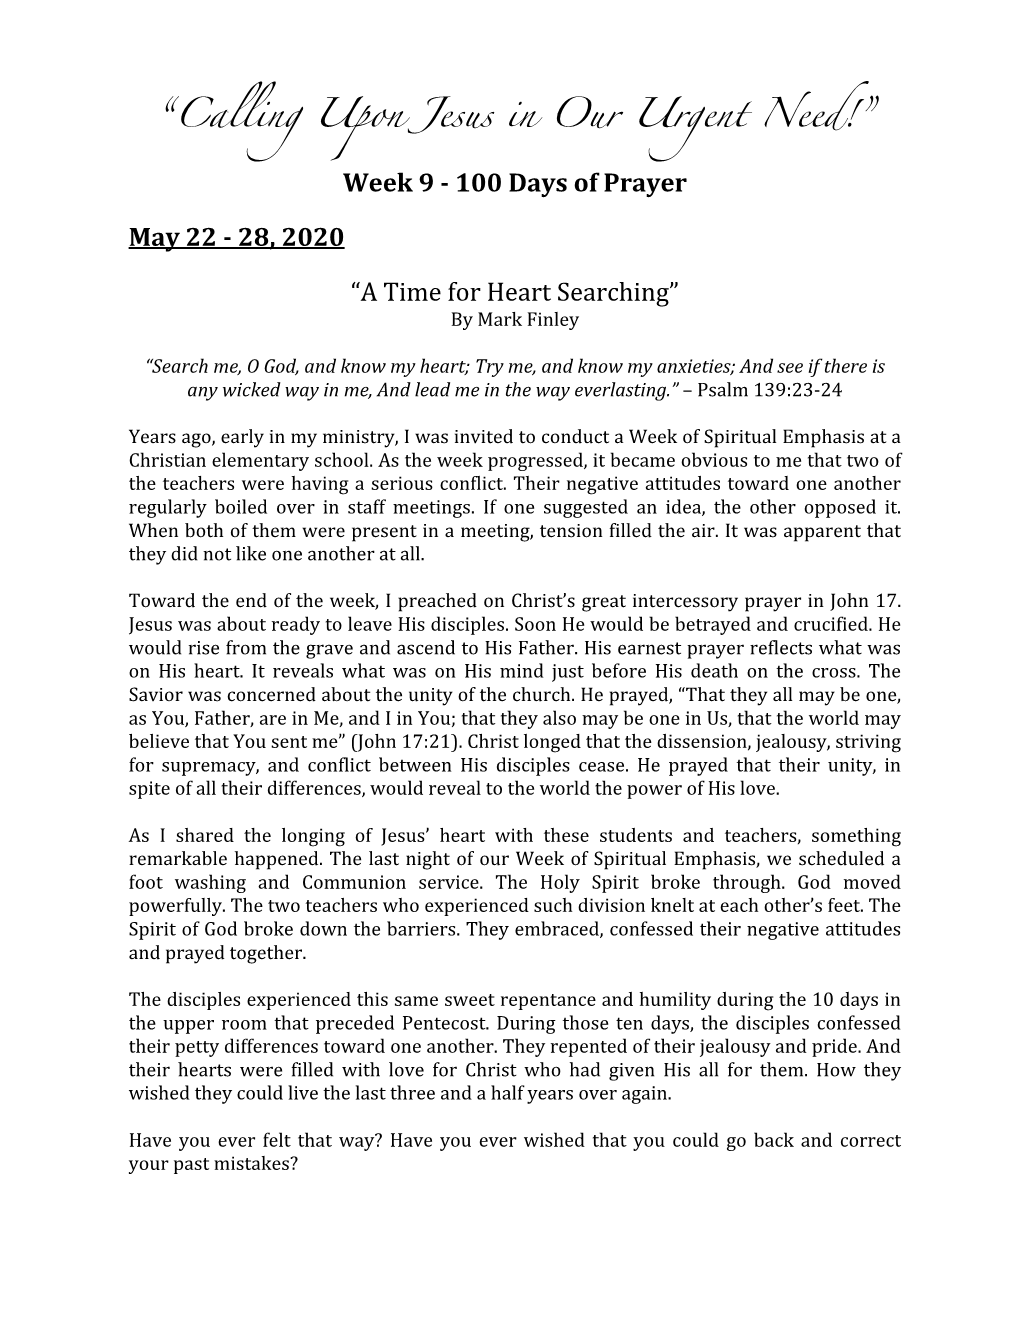 “Calling Upon Jesus in Our Urgent Need!” Week 9 - 100 Days of Prayer